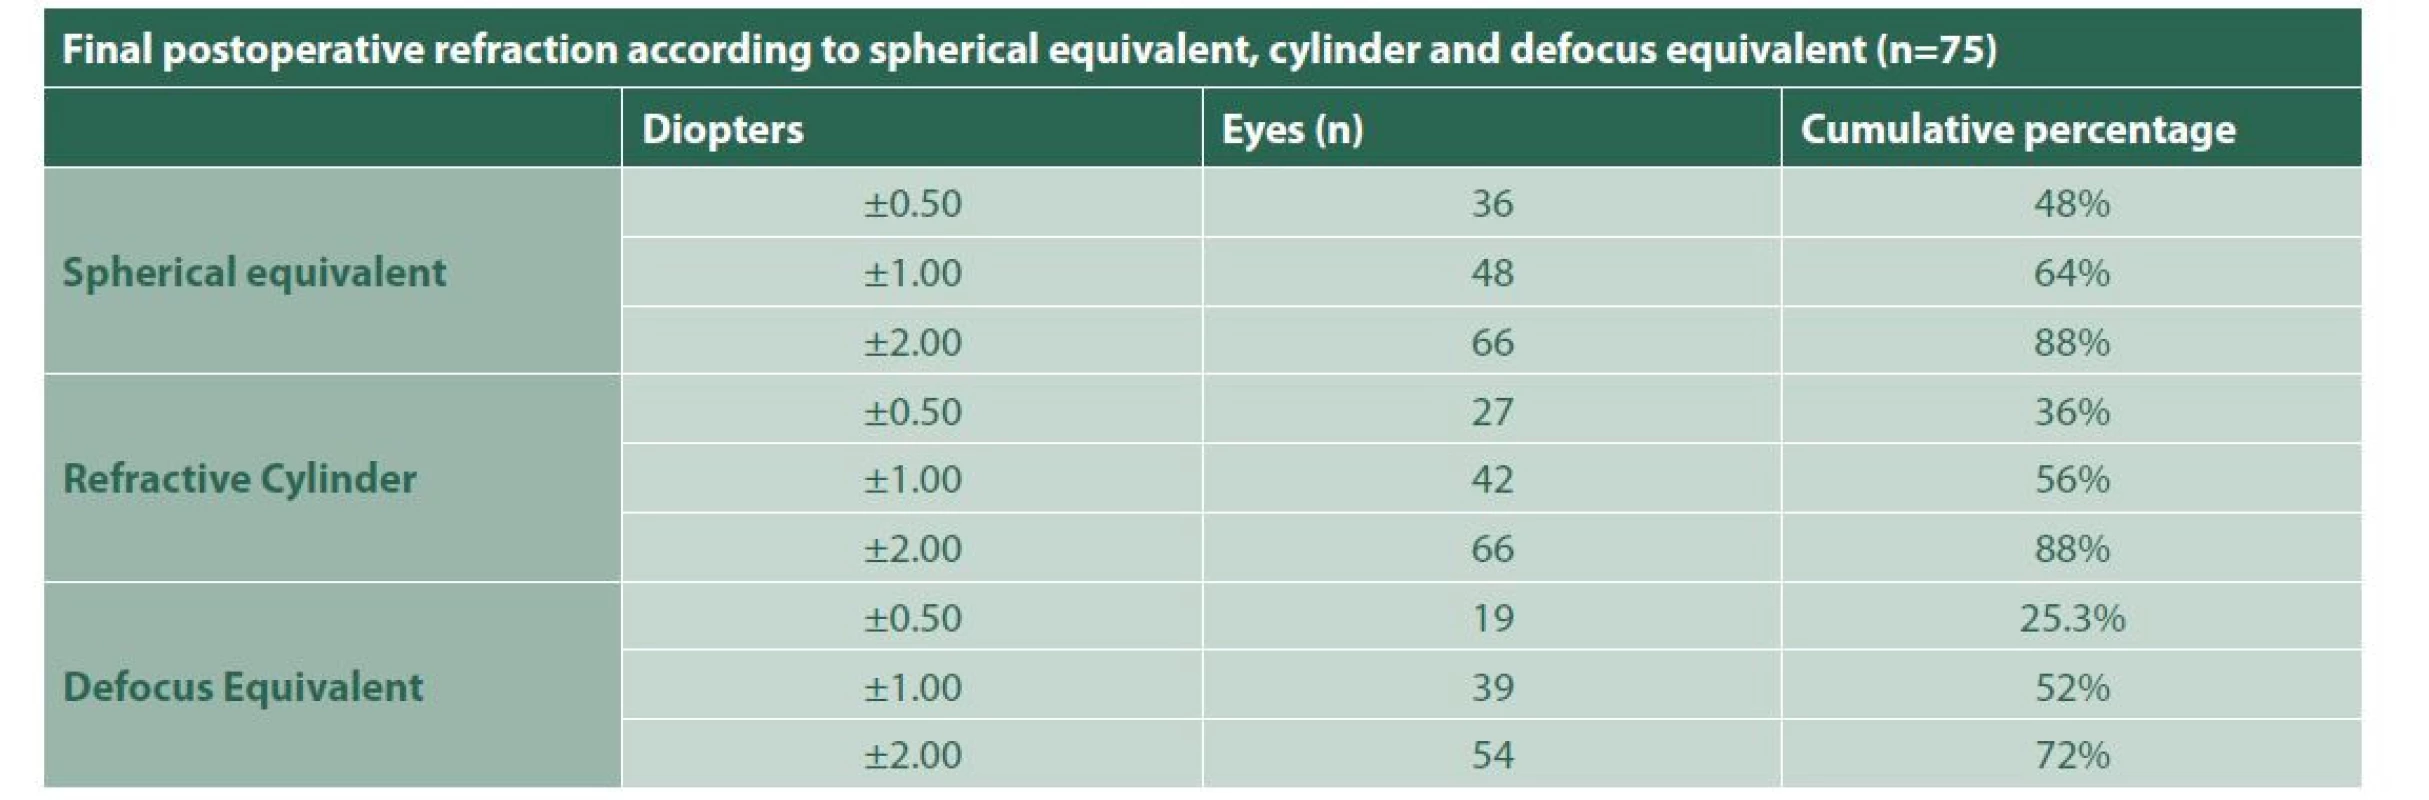 Final postoperative refraction according to spherical equivalent, cylinder and defocus equivalent